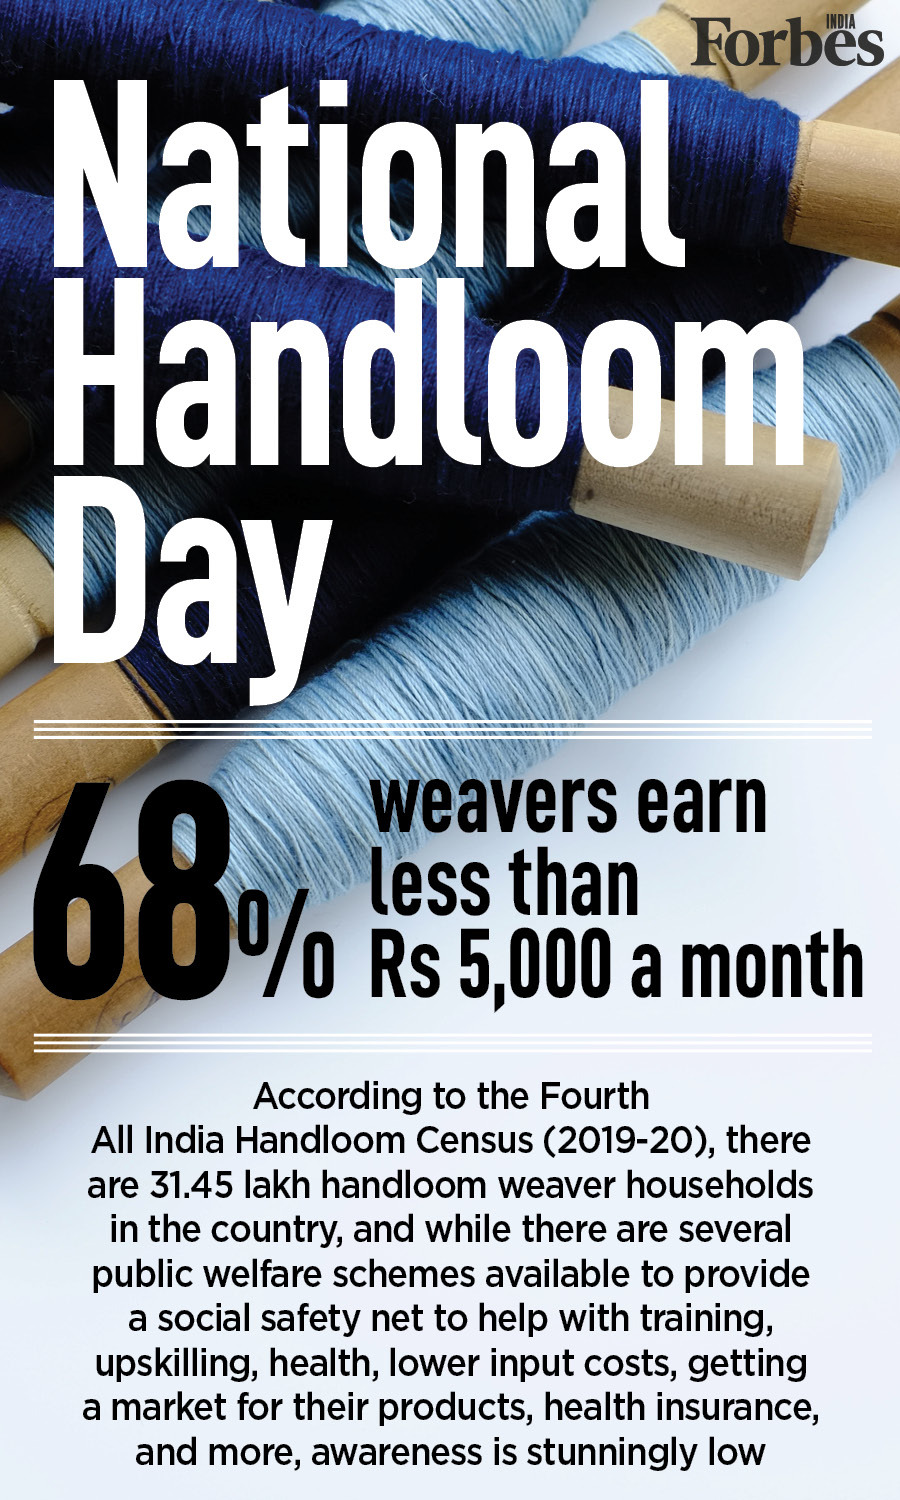 National Handloom Day: 68 percent of weavers earn less than Rs 5,000 a month